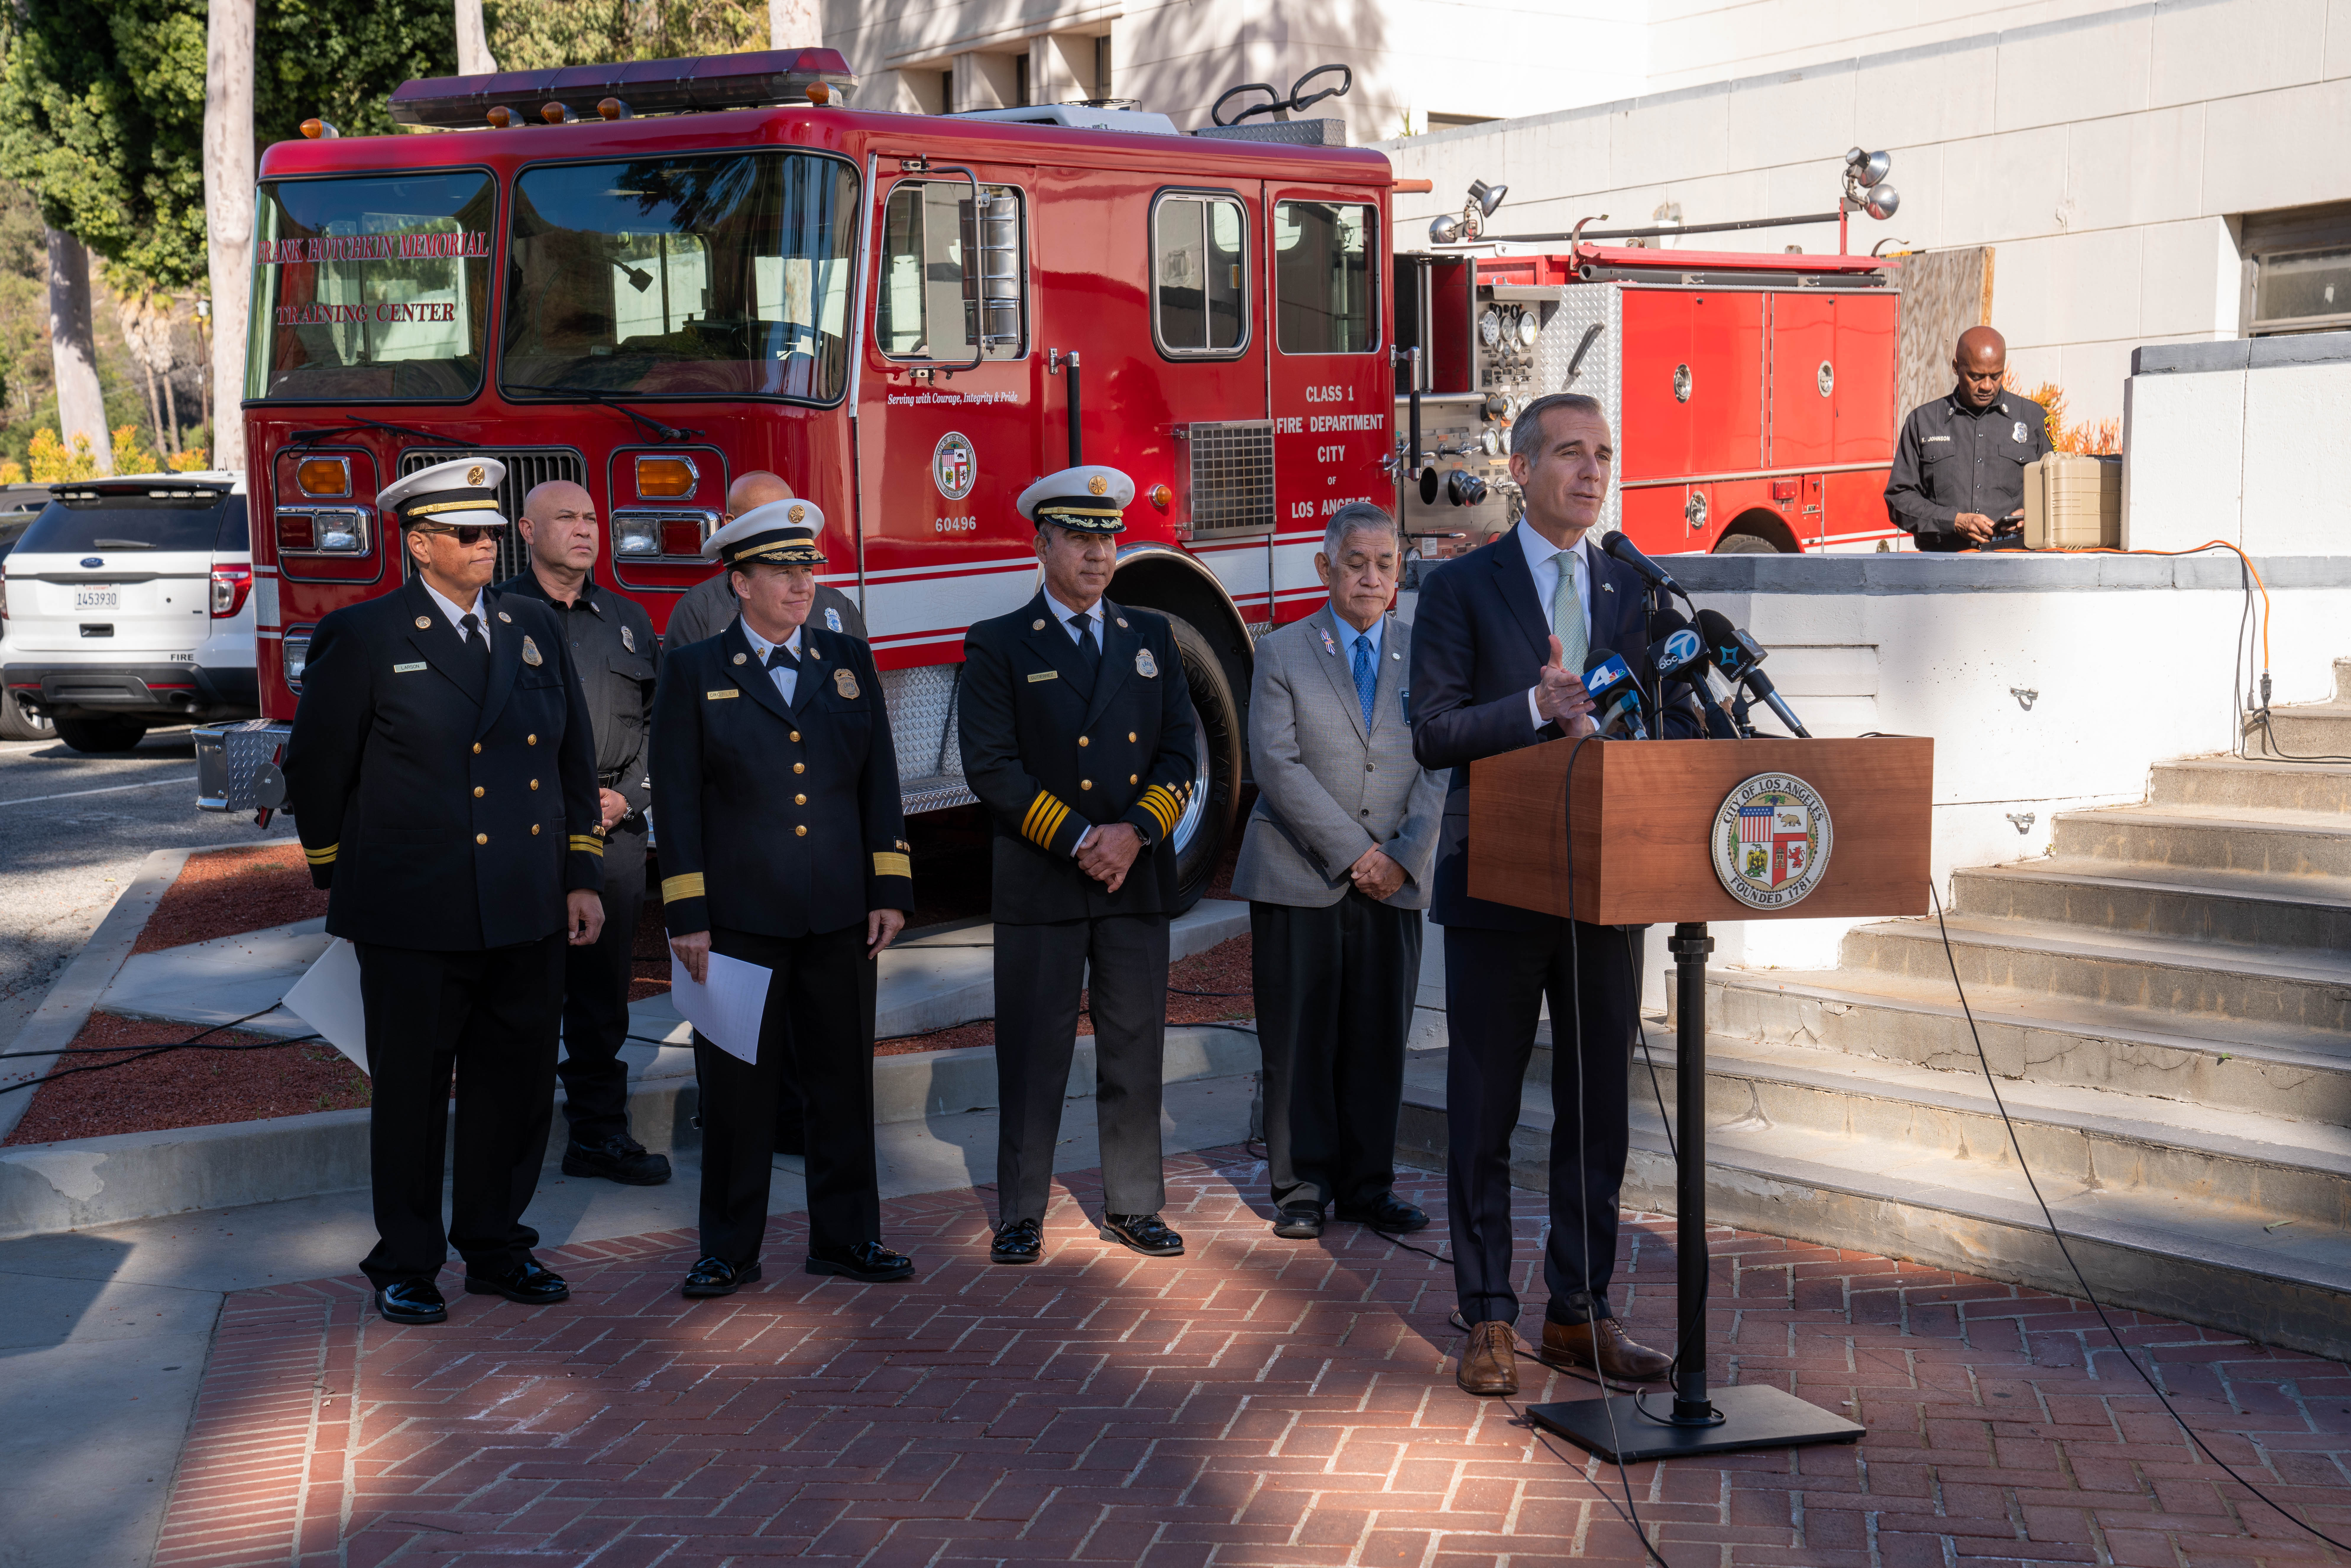 Mayor Garcetti speaking at a lectern with a fire engine and several fire chiefs behind him.